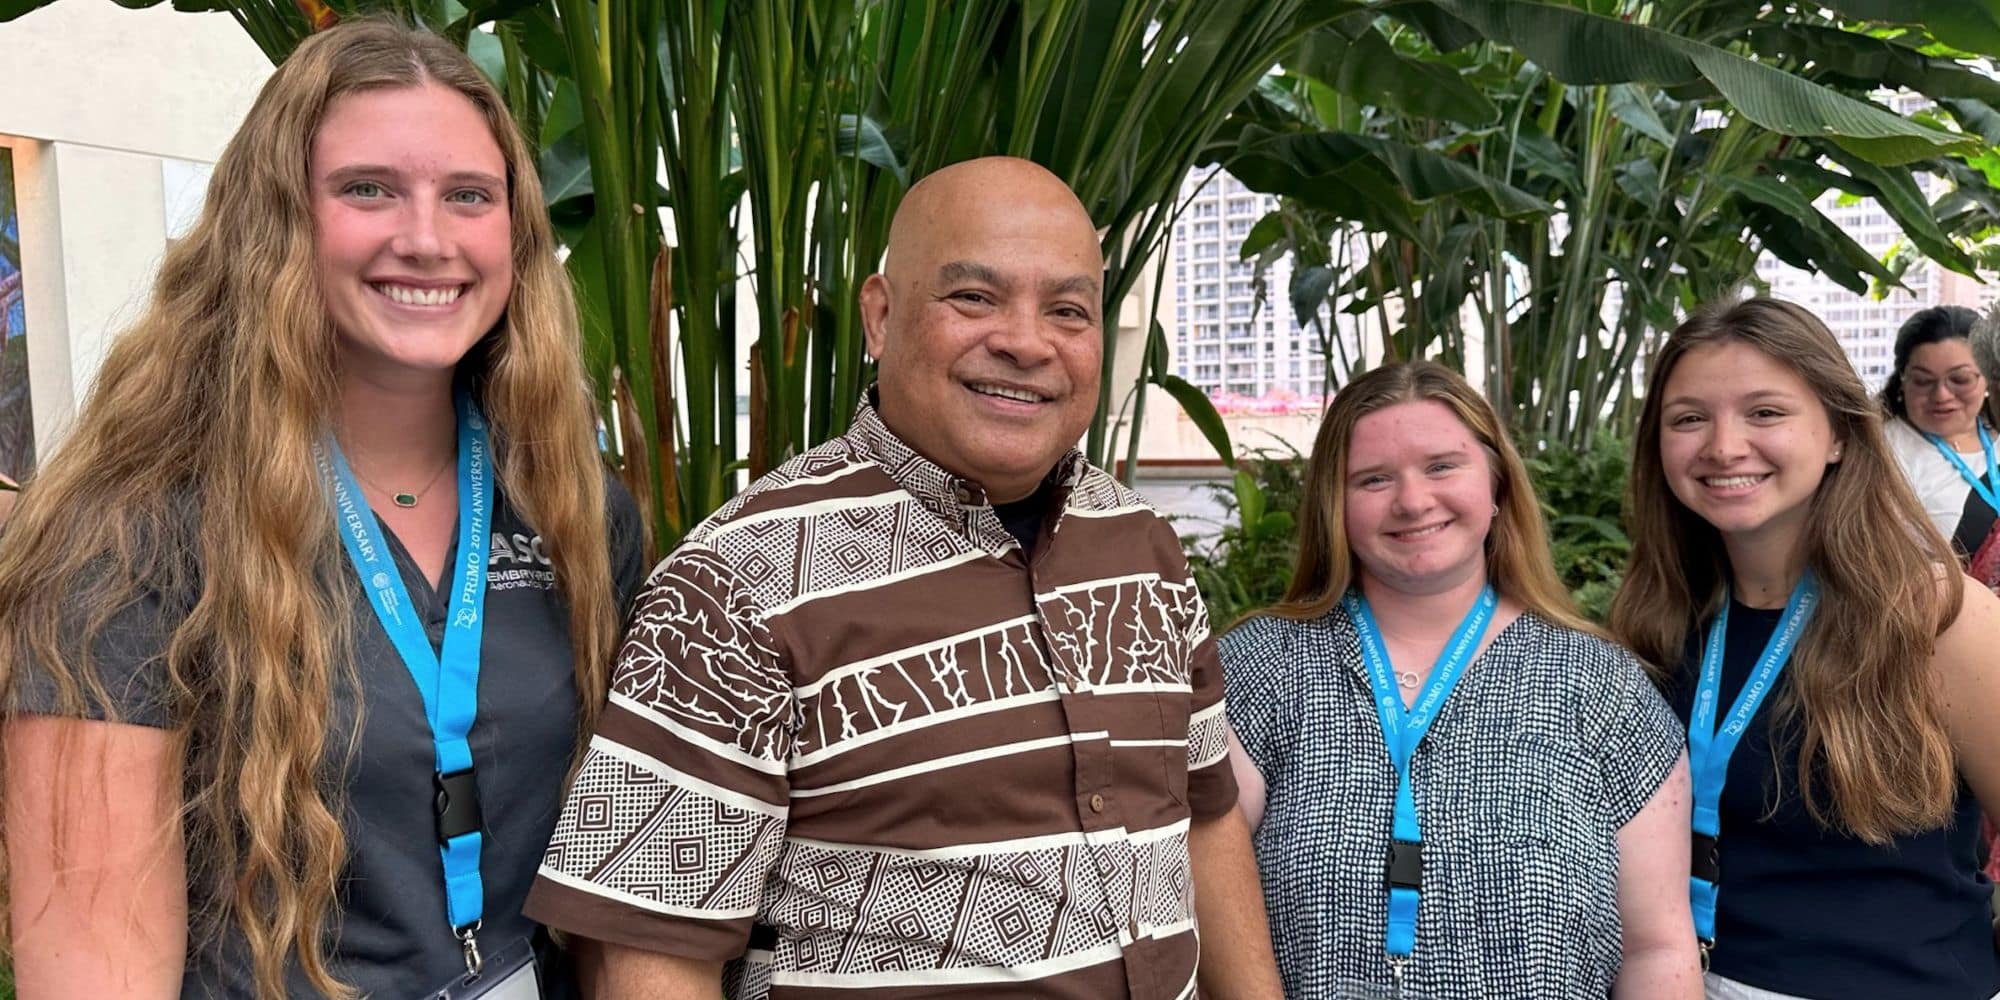 From left to right: Syndey Makarovich, the President of the Federated States of Micronesia David Panuelo, ITE President Madalyn Smith and treasurer Beatrice Ribeiro at the Institute of Transportation Engineers conference in Hawaii. (Photo: Sydney Makarovich)